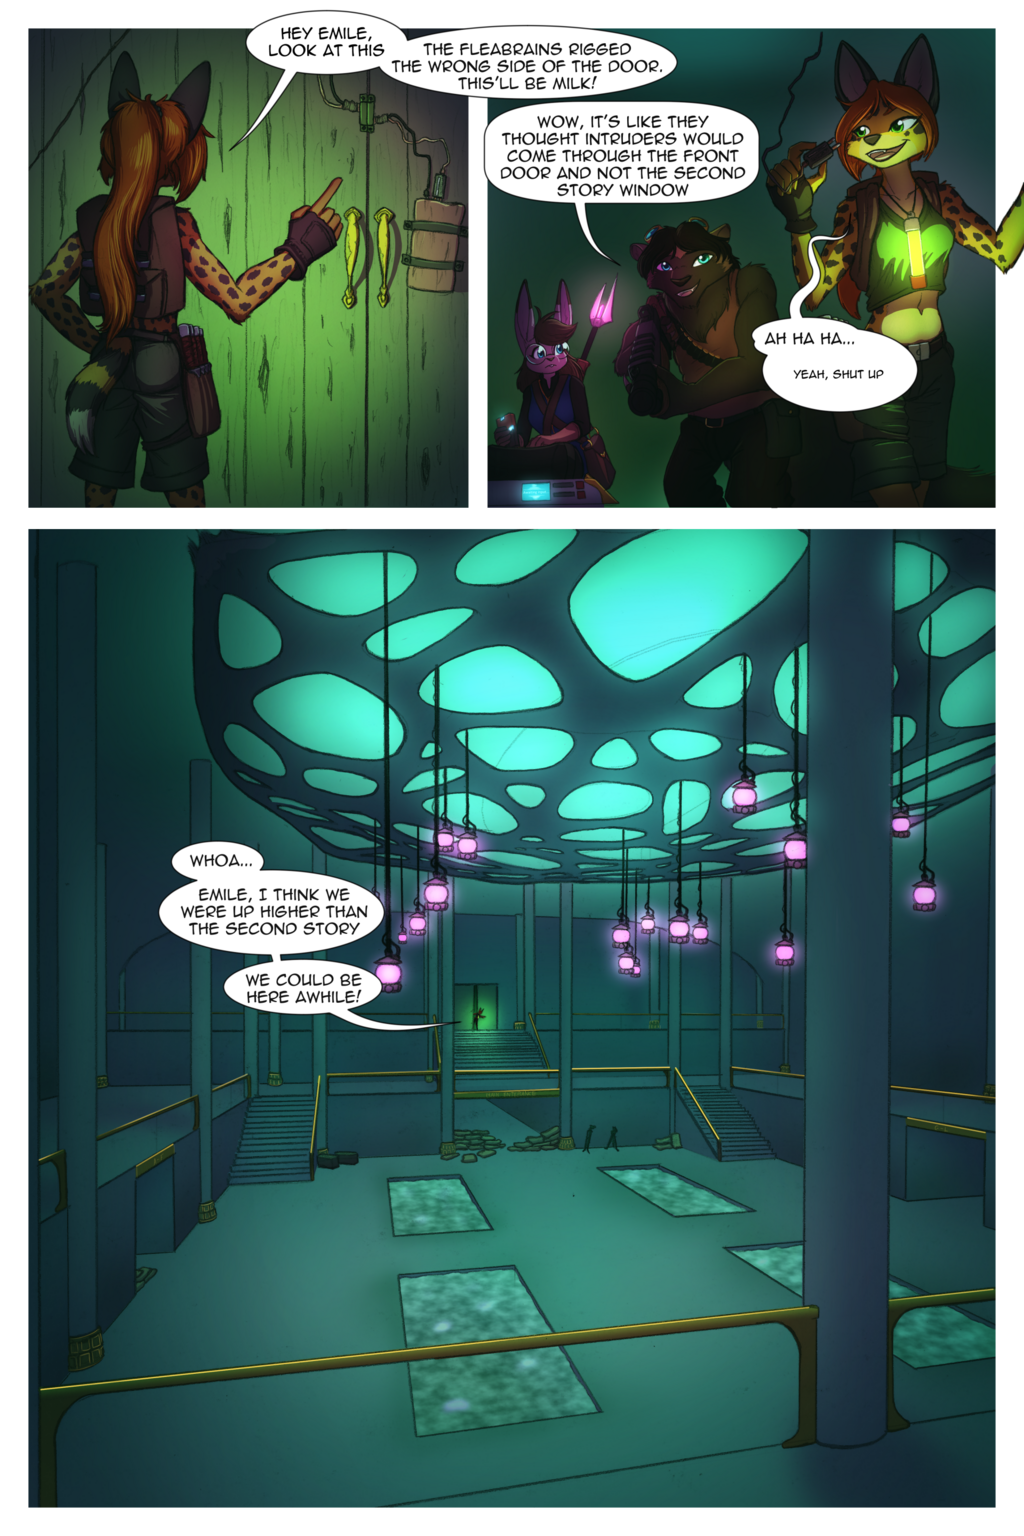 Wheel of Fire - Chapter 1 Page 7